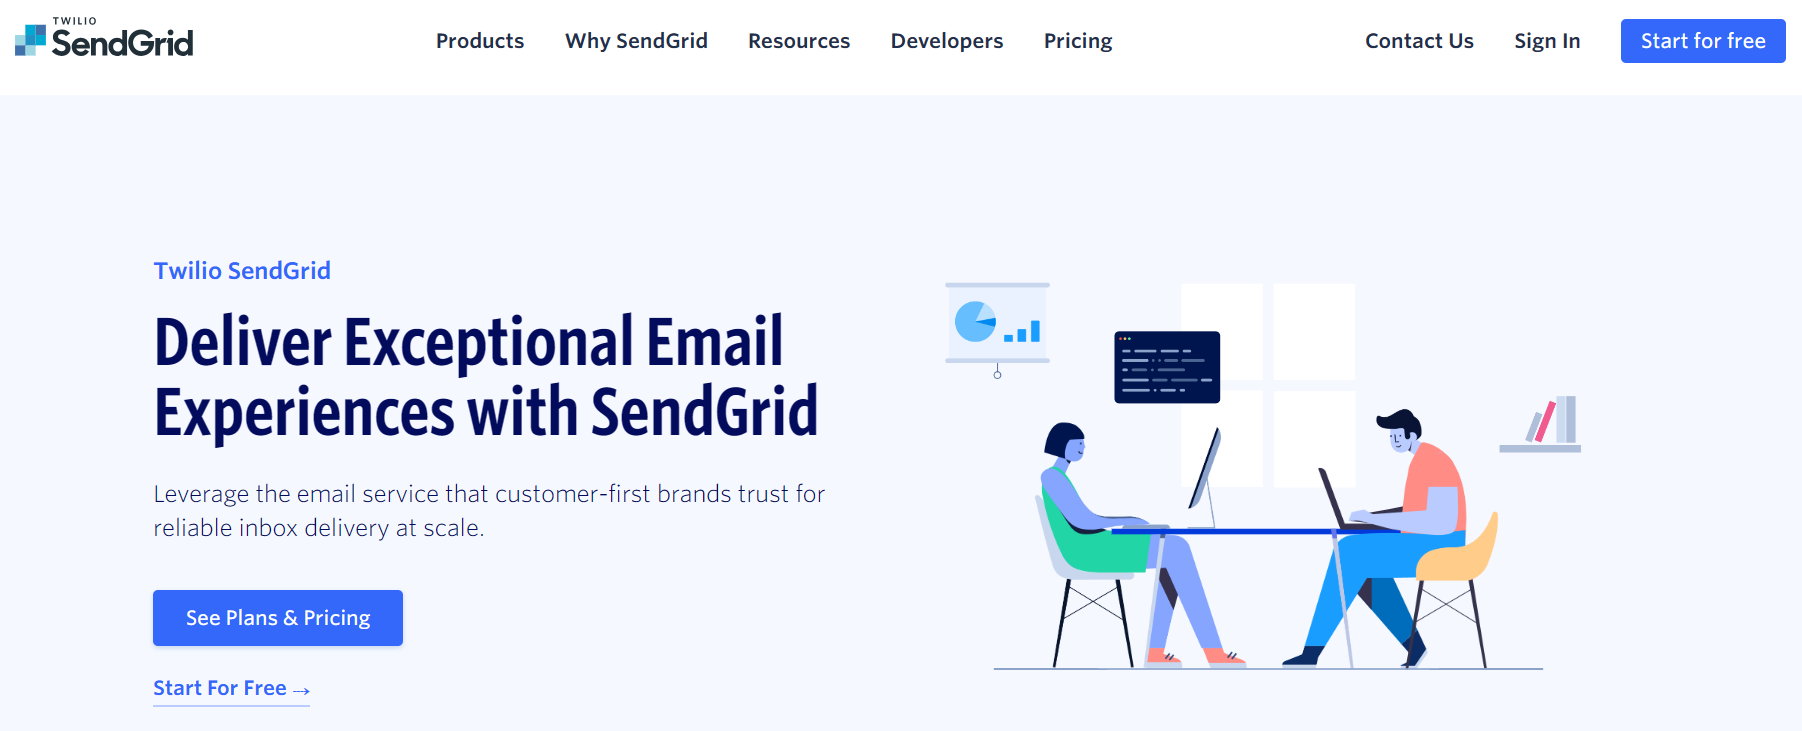 SendGrid Features: Exploring the Key Capabilities and Benefits of the Email Delivery and Marketing Platform. 